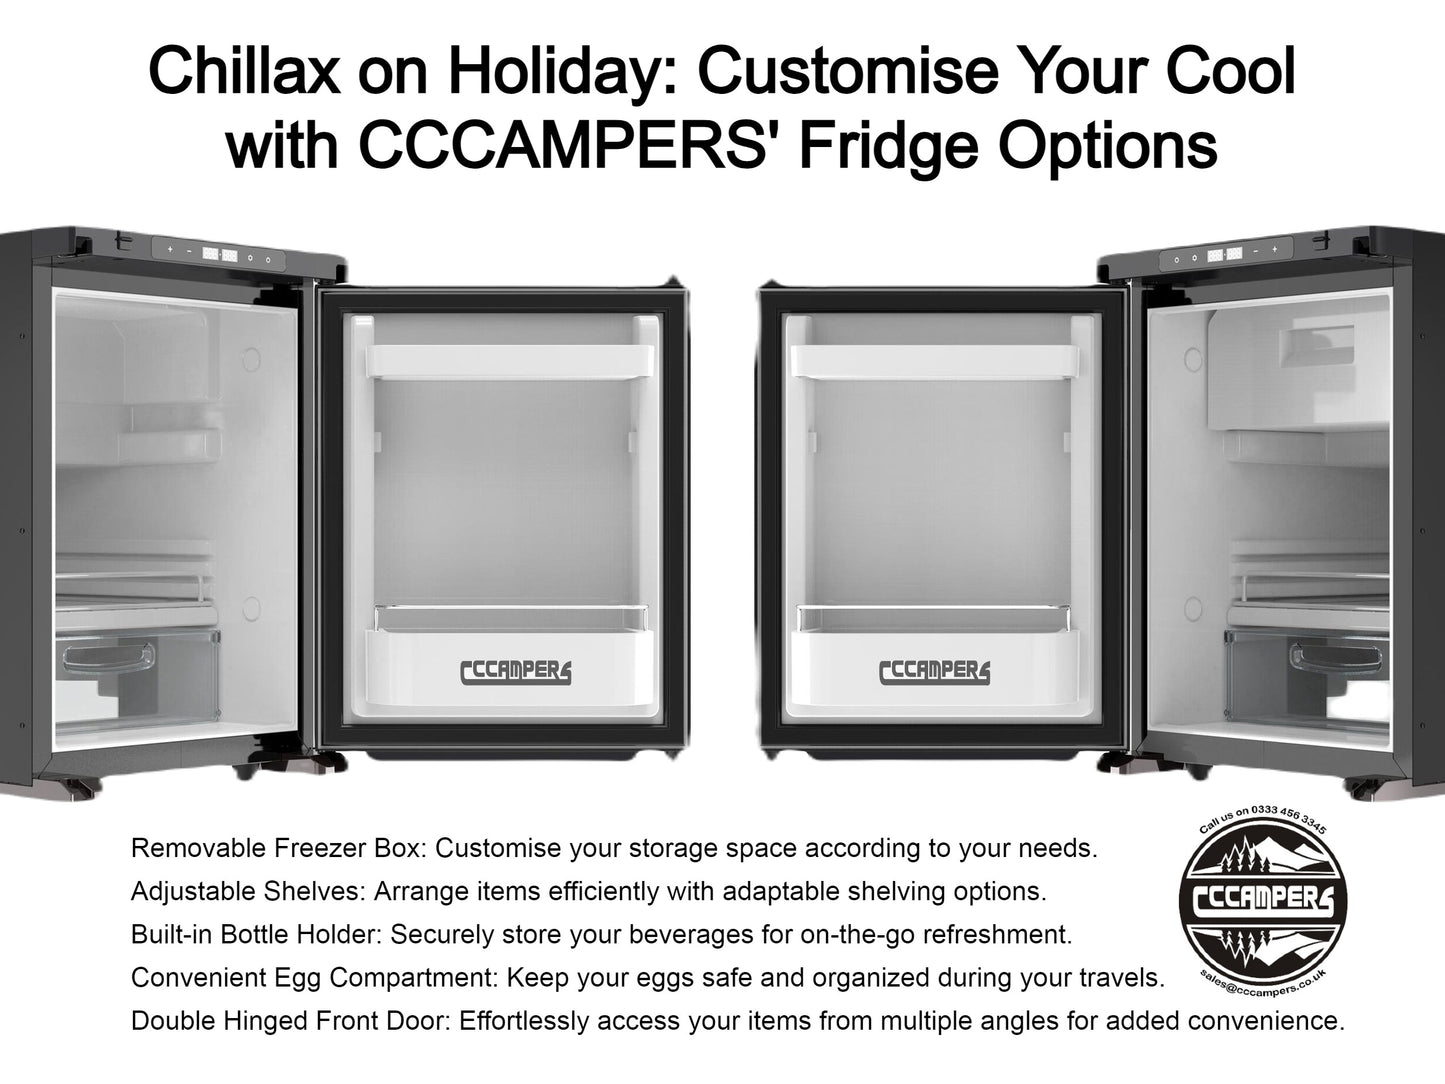 Chillax on Holiday: Customise Your Cool with CCCAMPERS' Fridge Options